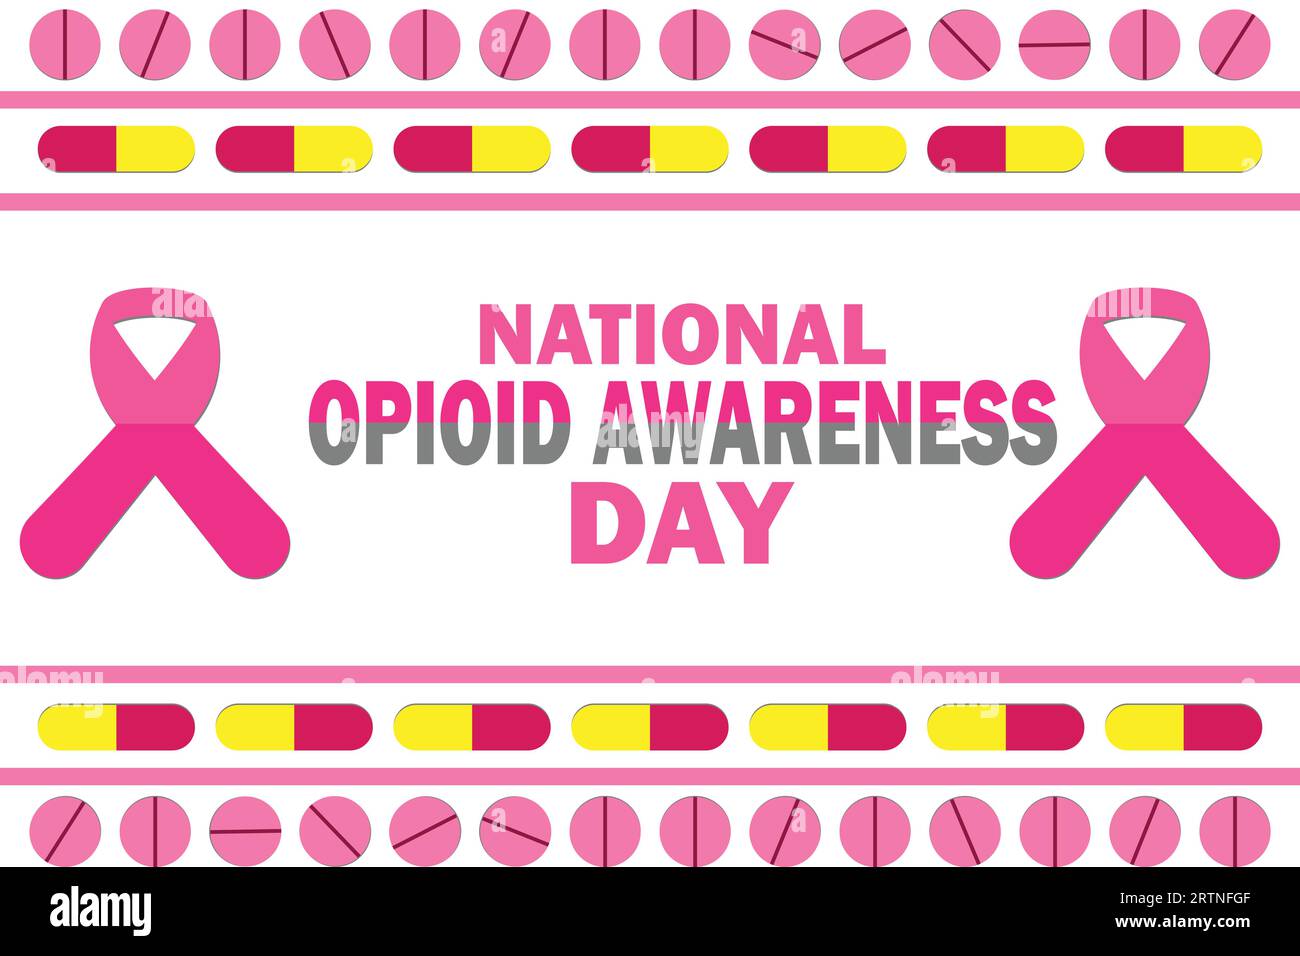 National Opioid Awareness Day. Vector illustration. Pink ribbon and pills on a white background. Stock Vector